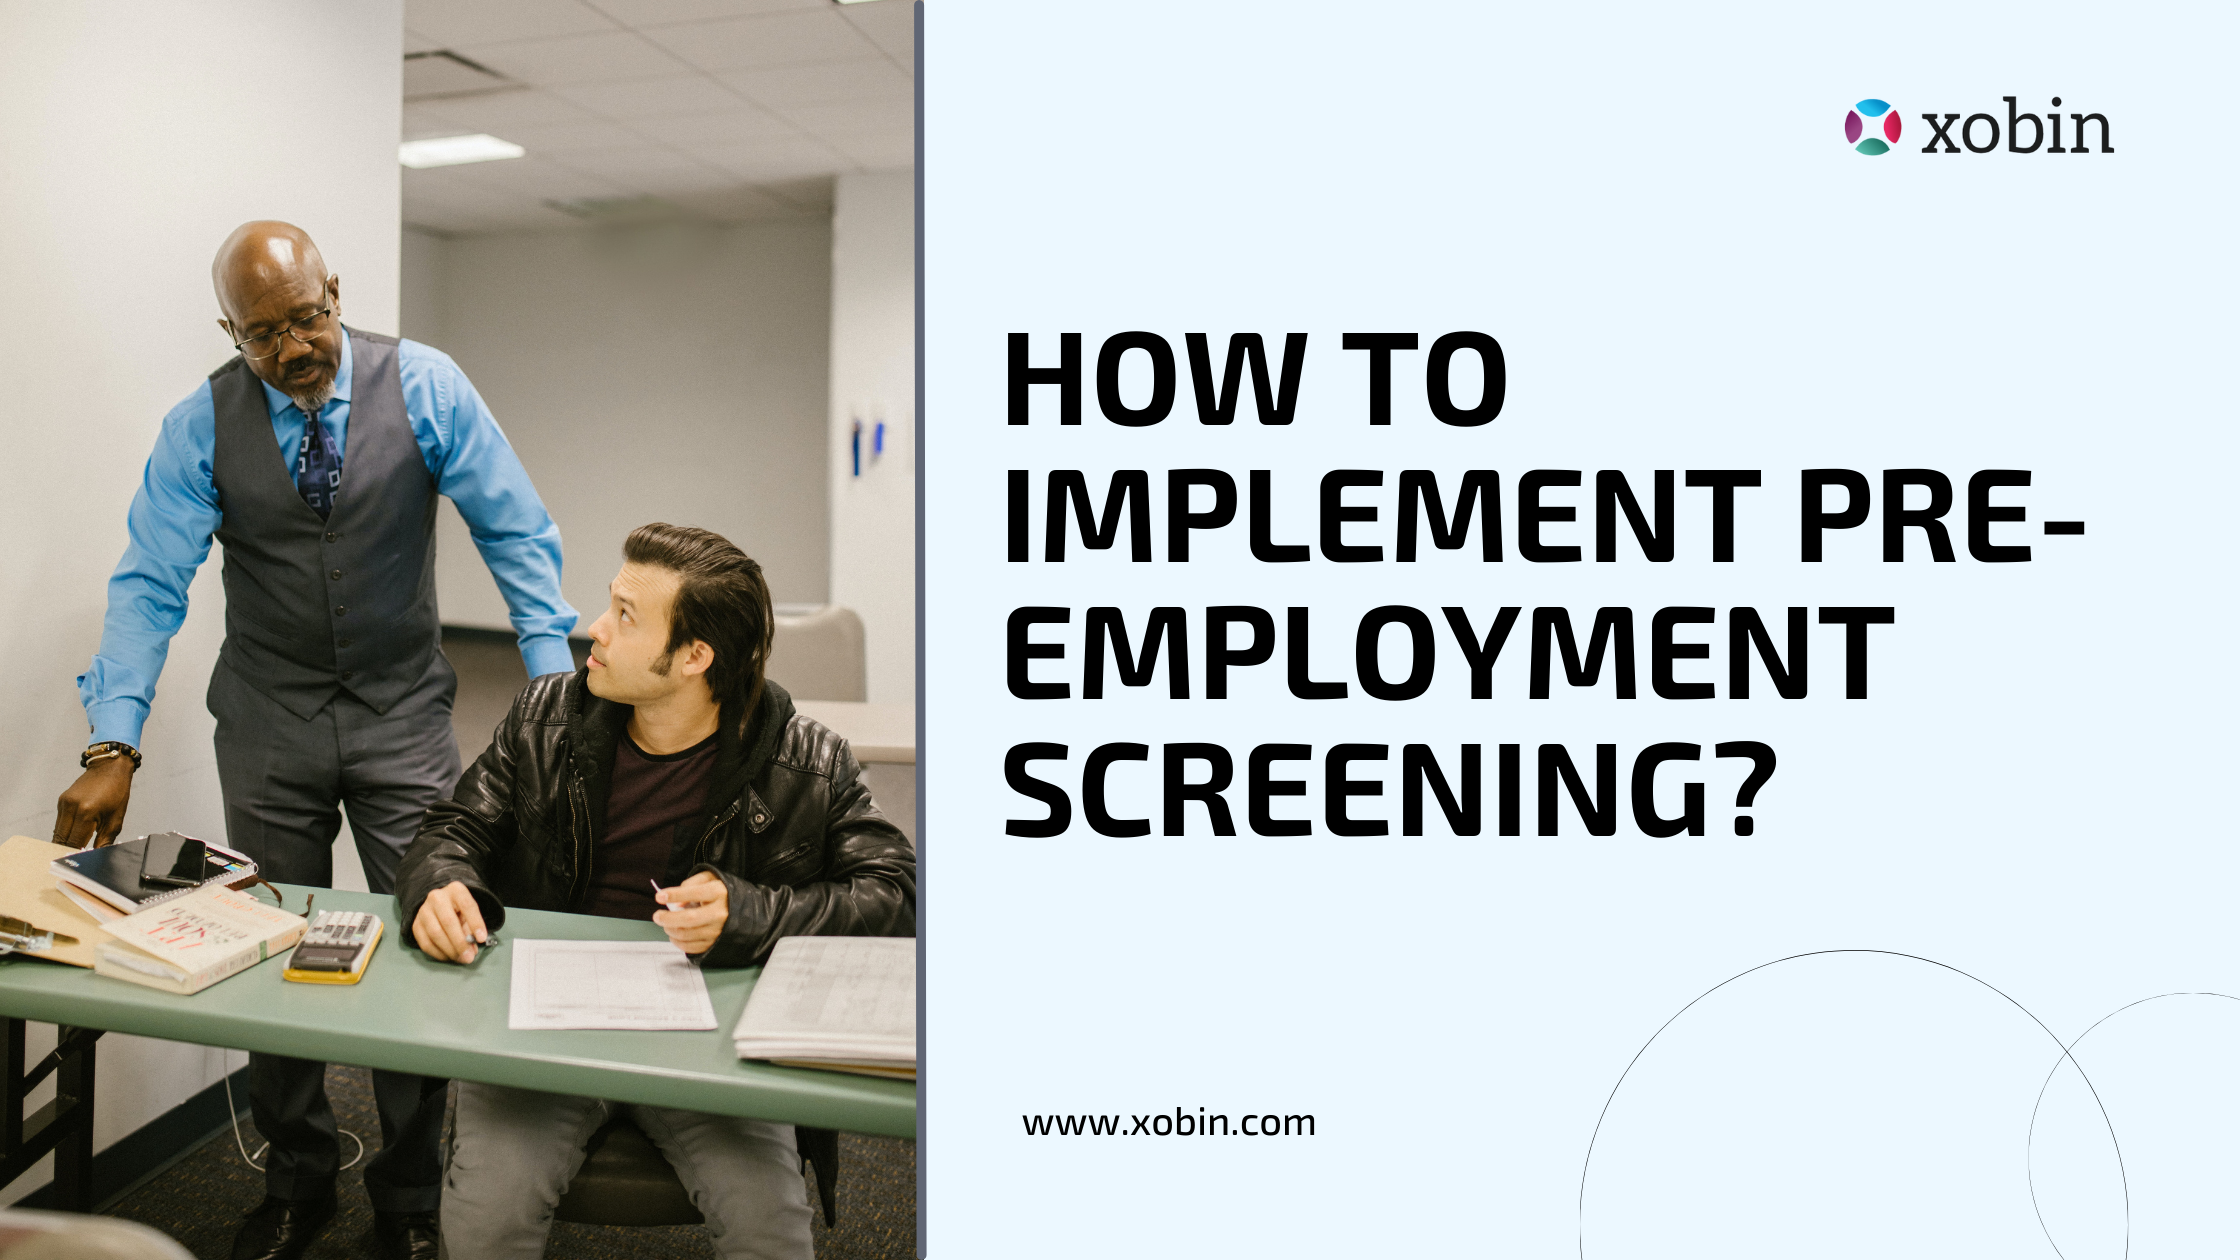 How to implement pre-employment screening?